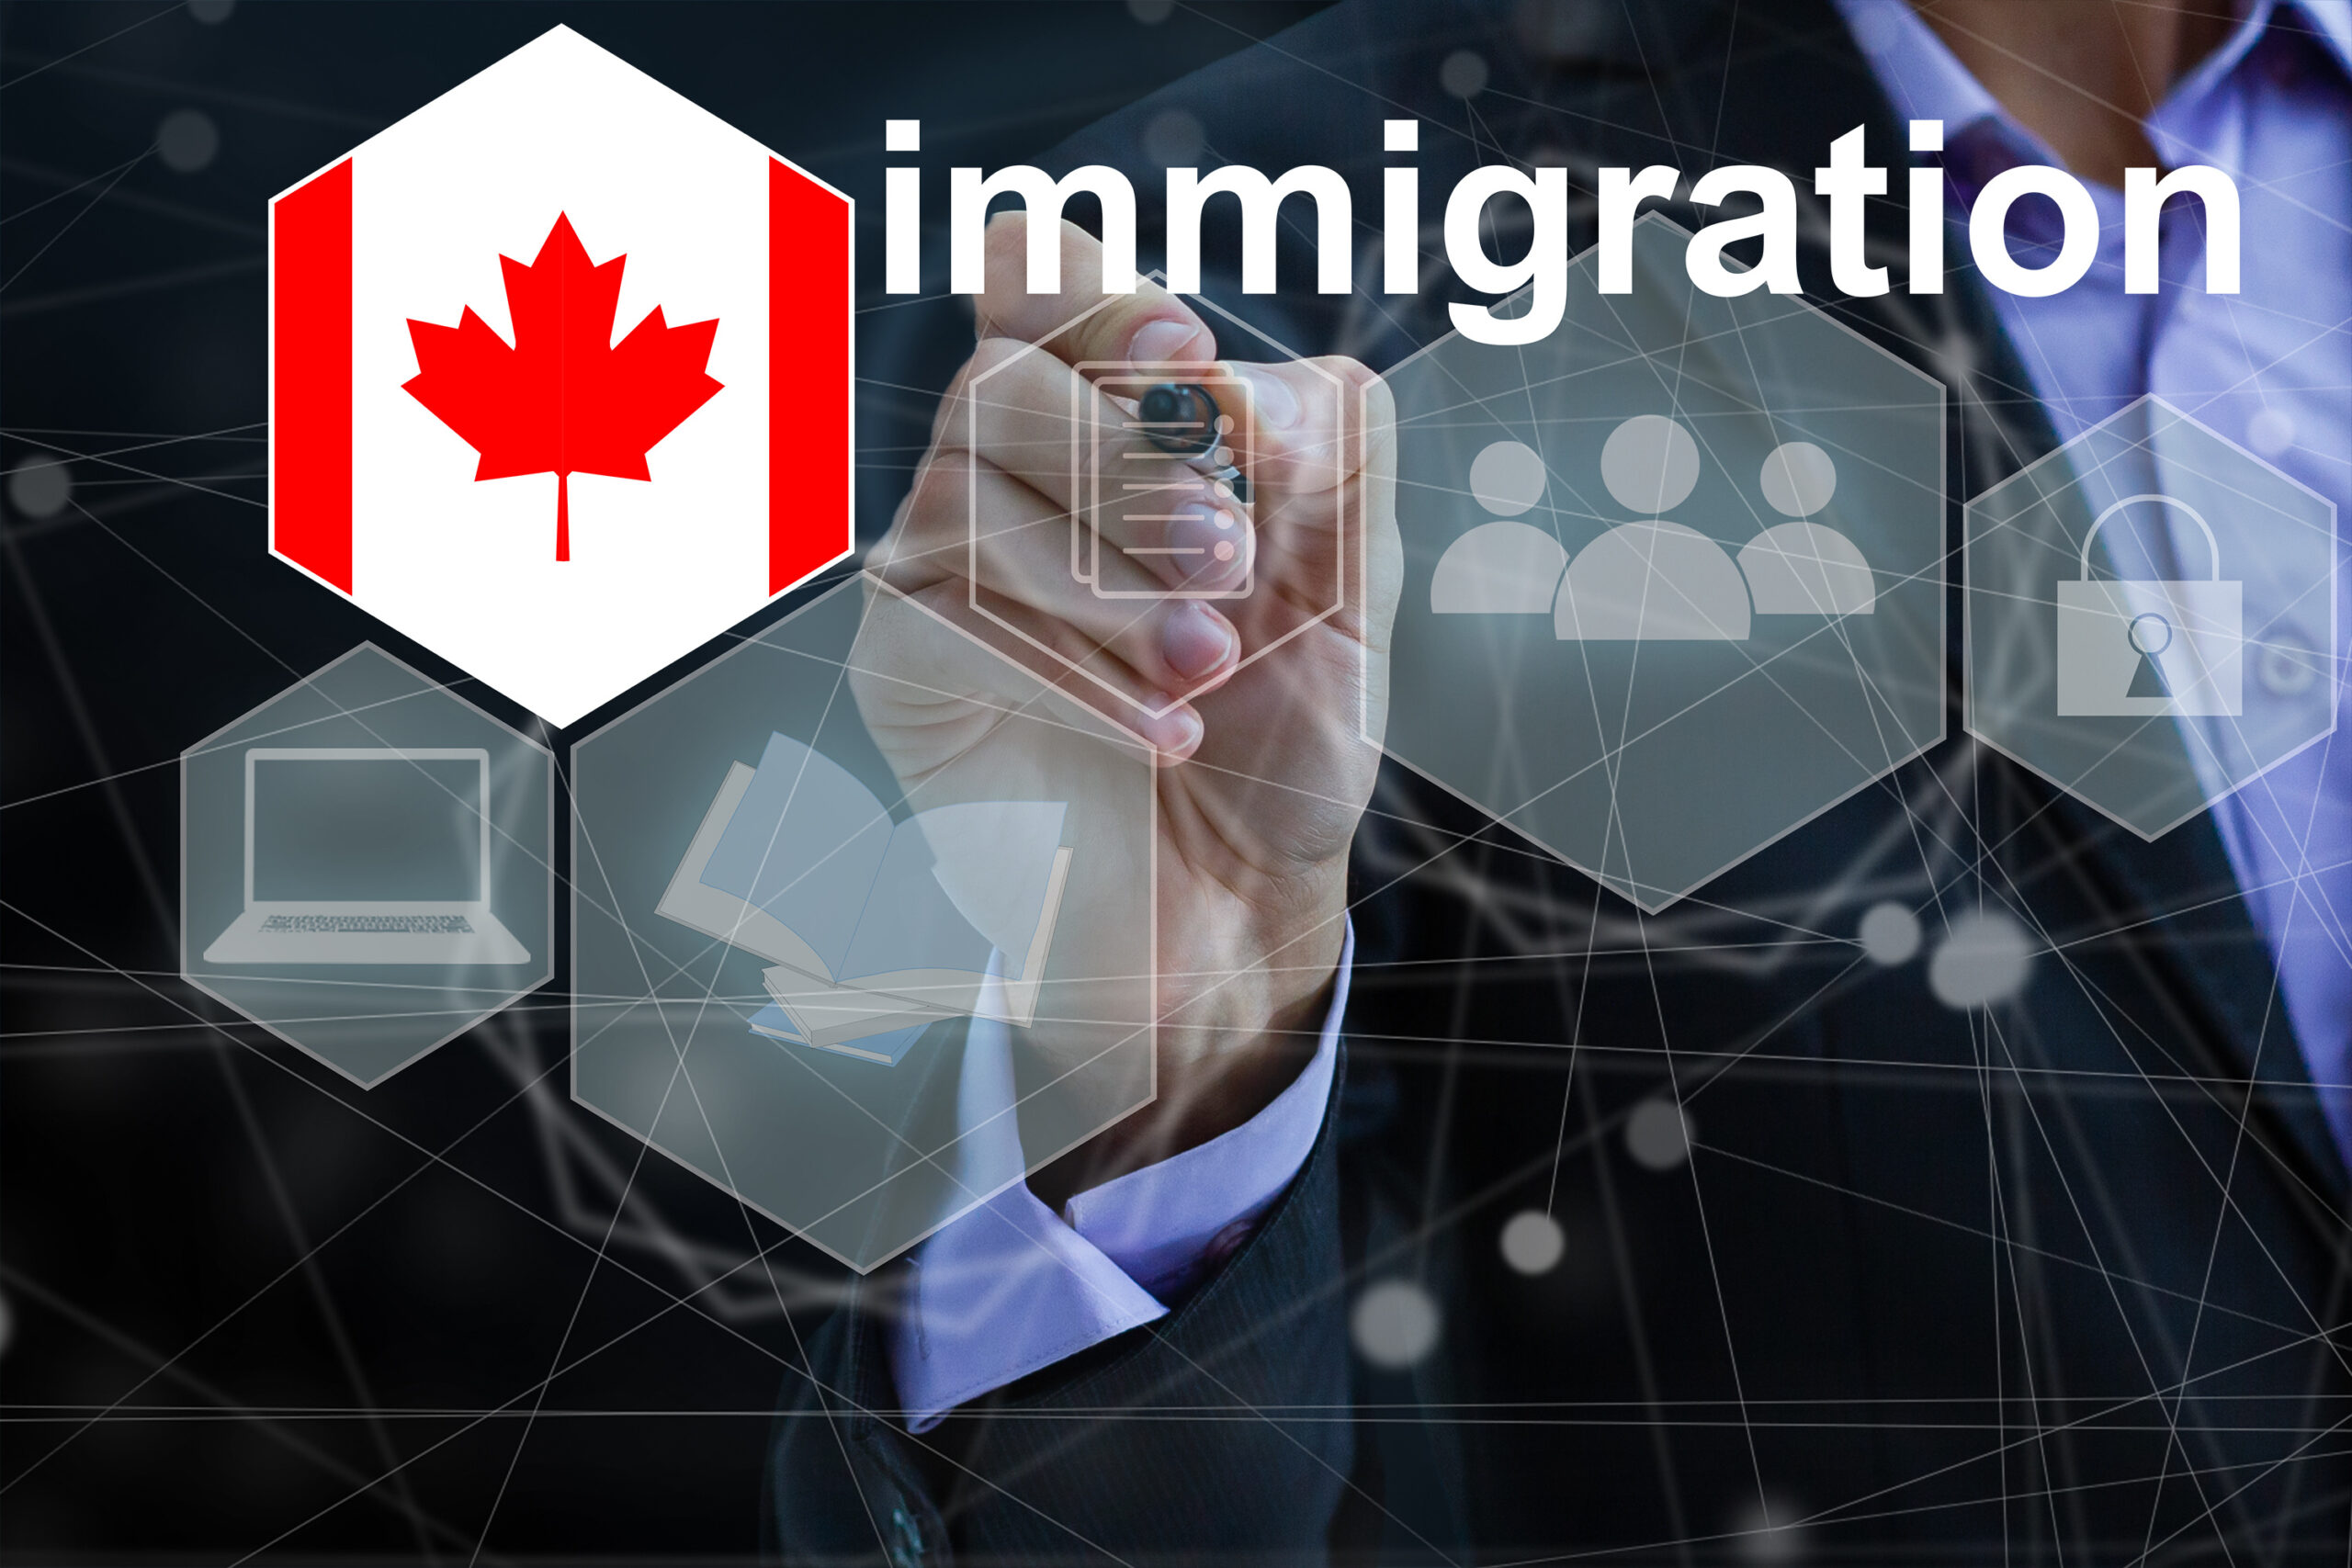 Concept of immigration to Canada with virtual button pressing.